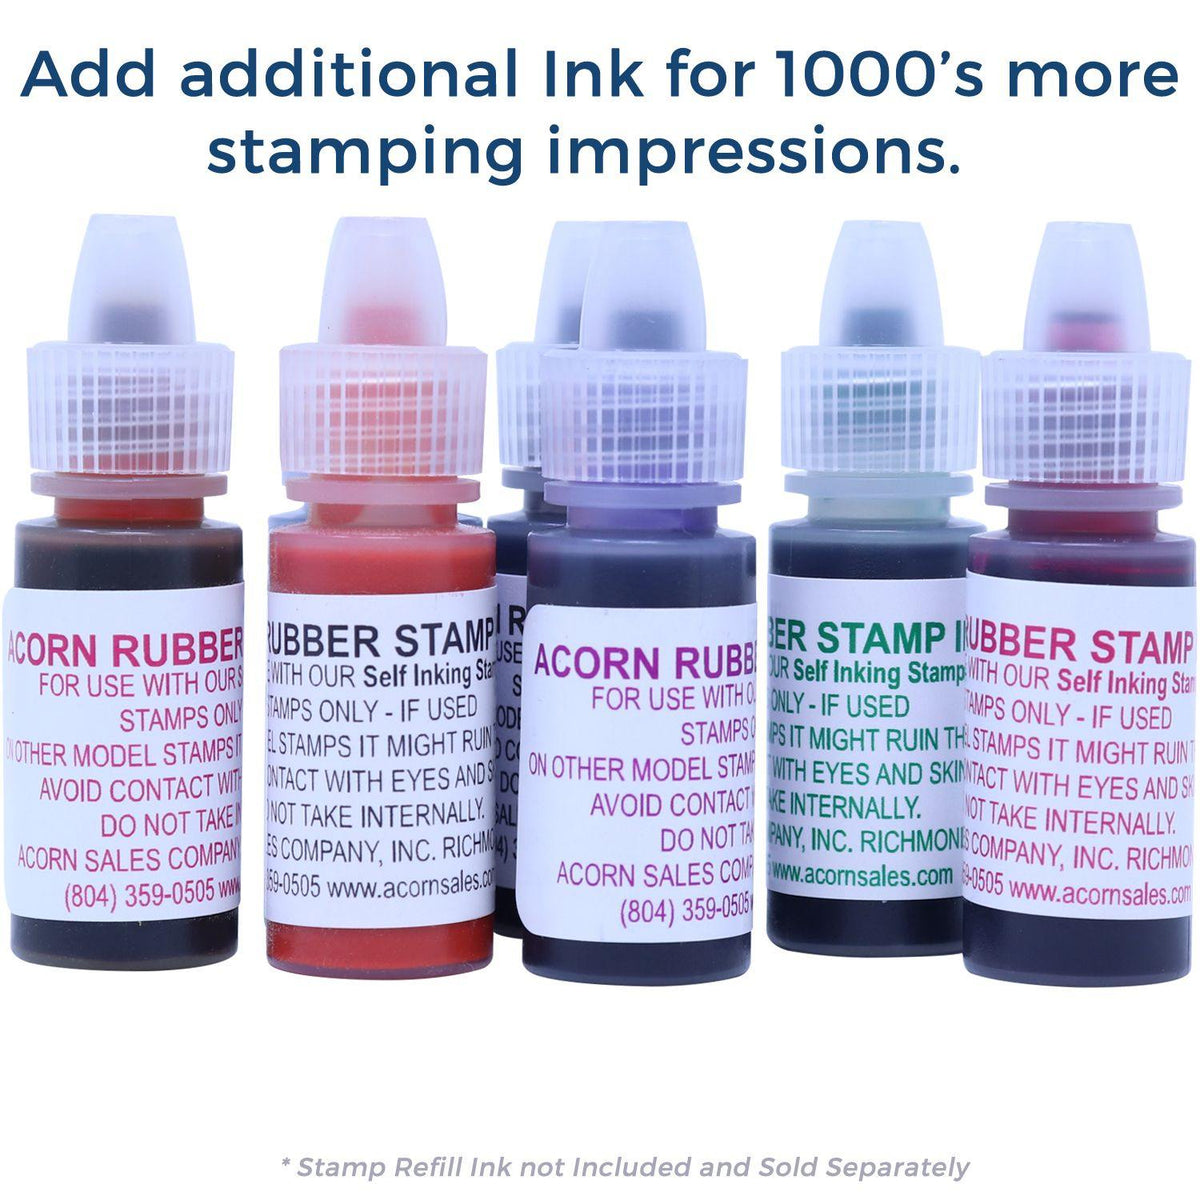 Slim Pre-Inked Cancelado with Box Stamp - Engineer Seal Stamps - Brand_Slim, Impression Size_Small, Stamp Type_Pre-Inked Stamp, Type of Use_Office, Type of Use_Shipping &amp; Receiving